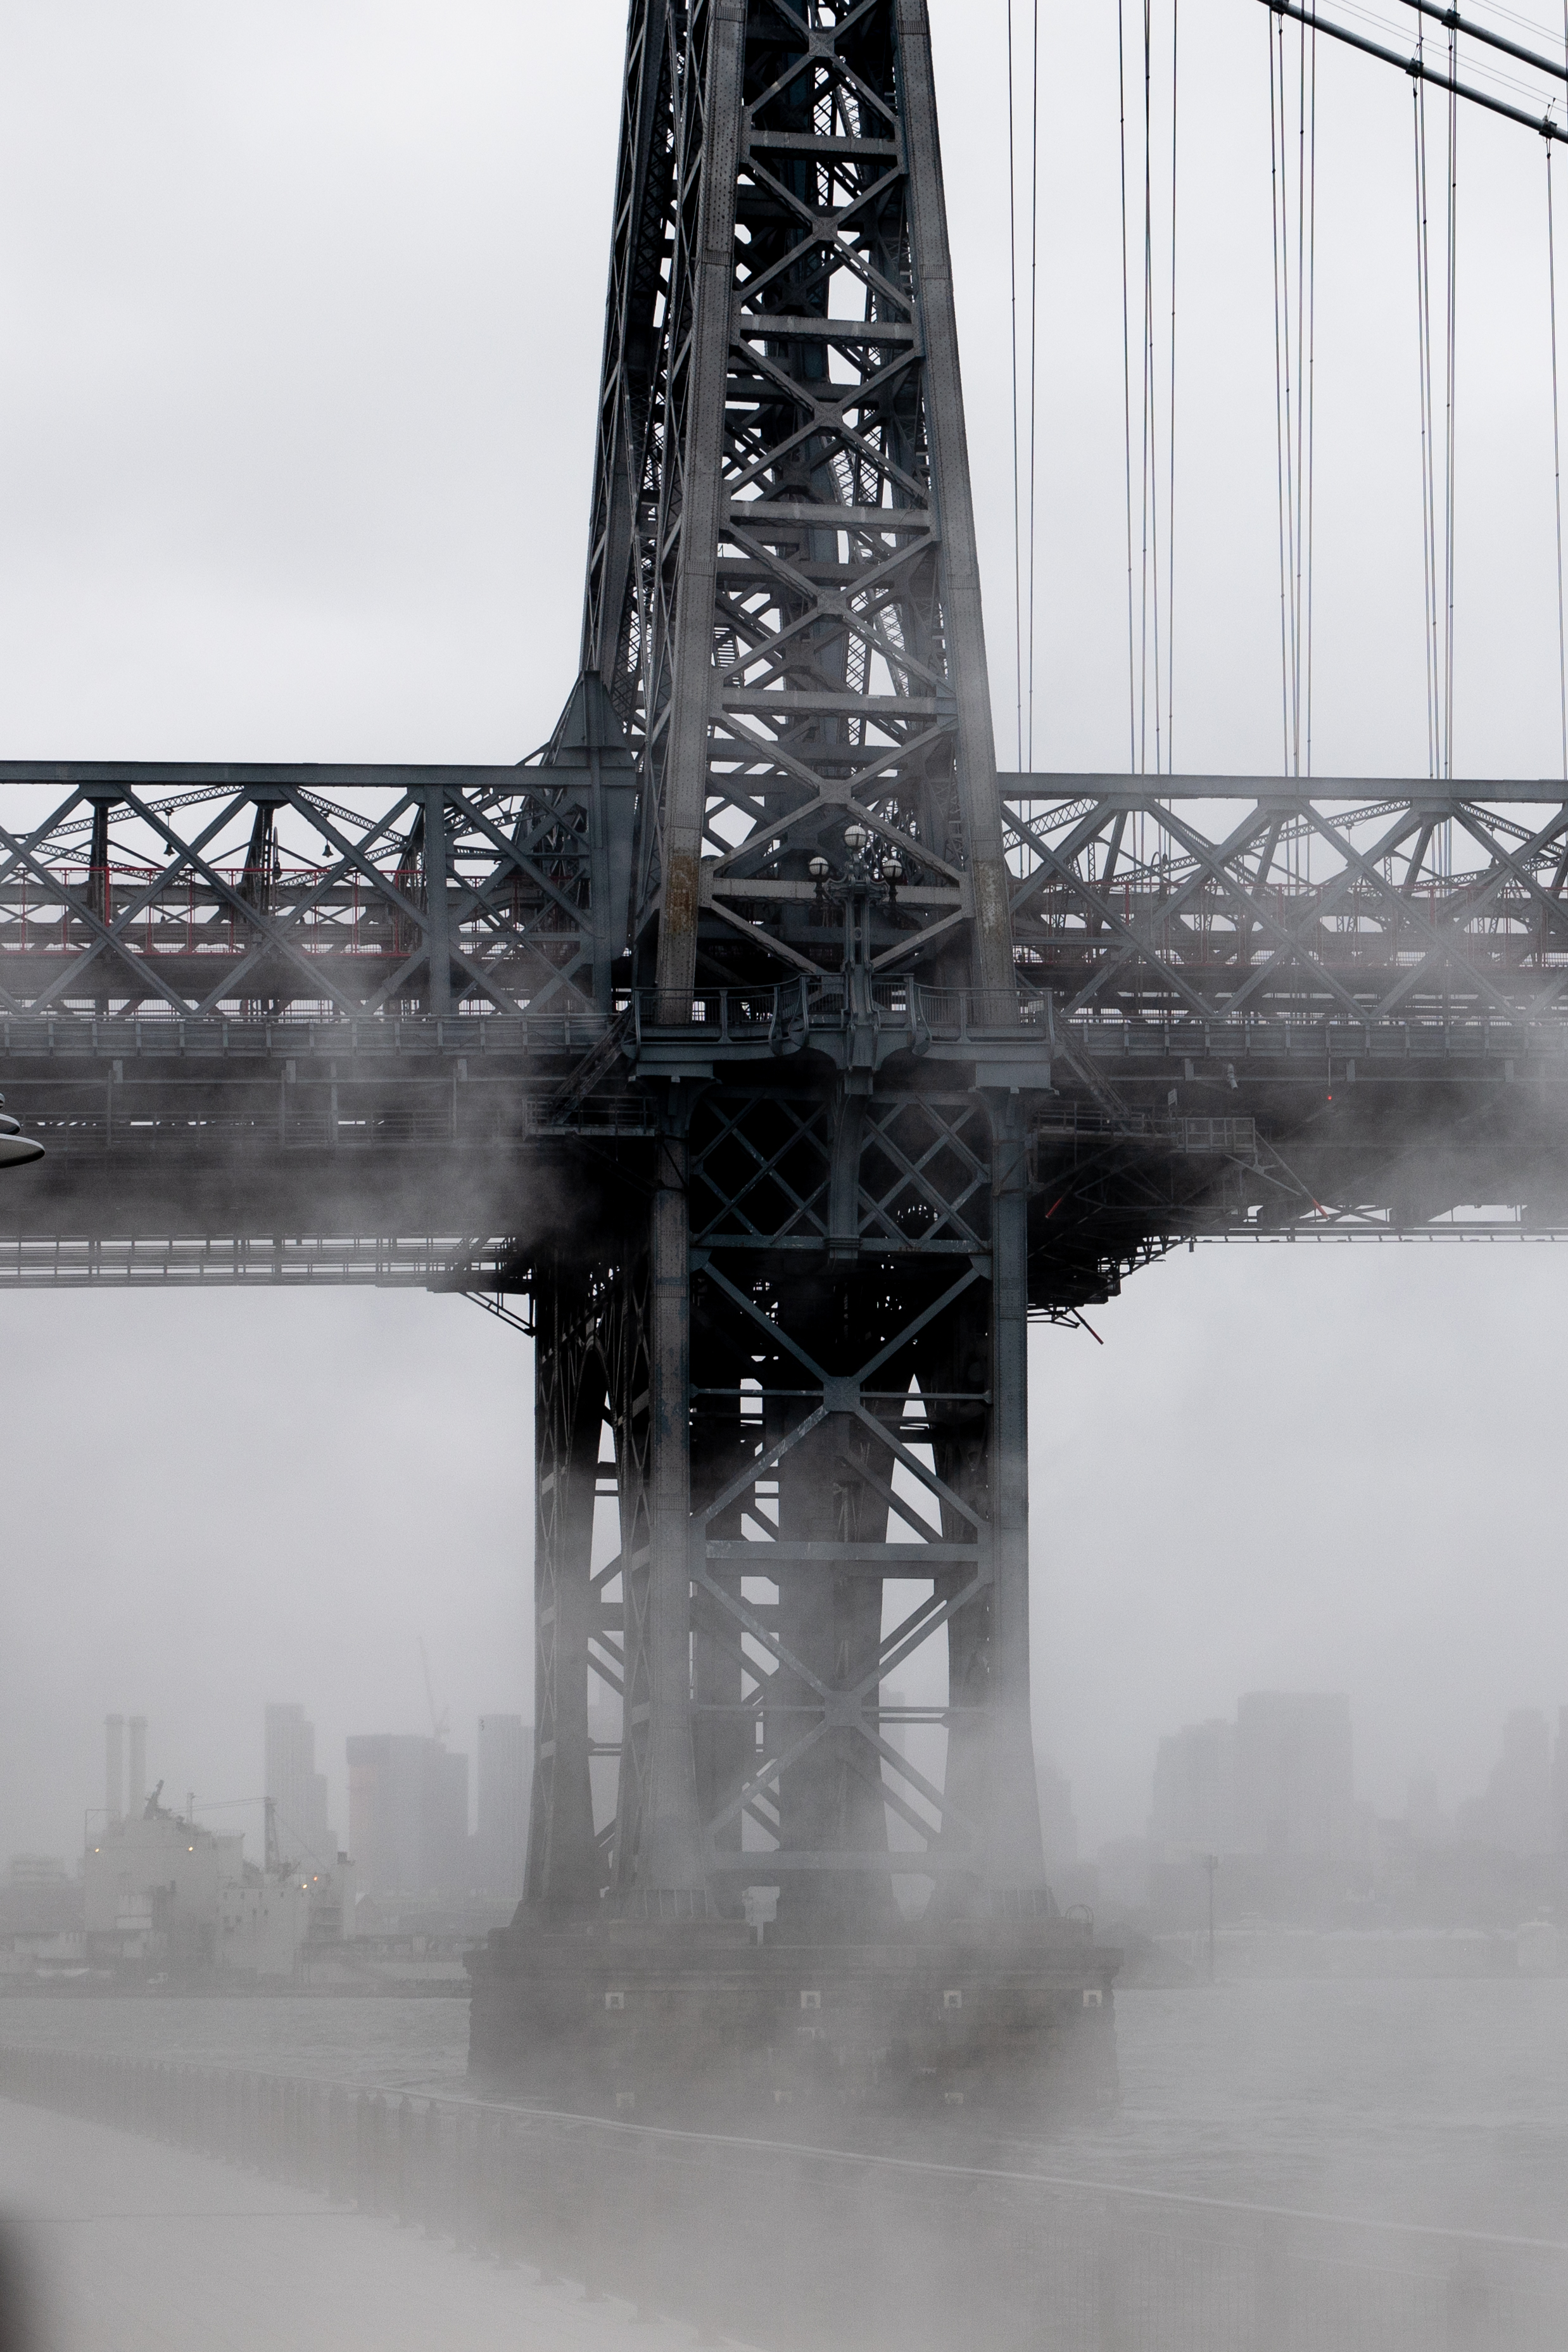  Williamsburg Bridge. For Sarah Gearhart’s Outside/In runners guide. NYC. 